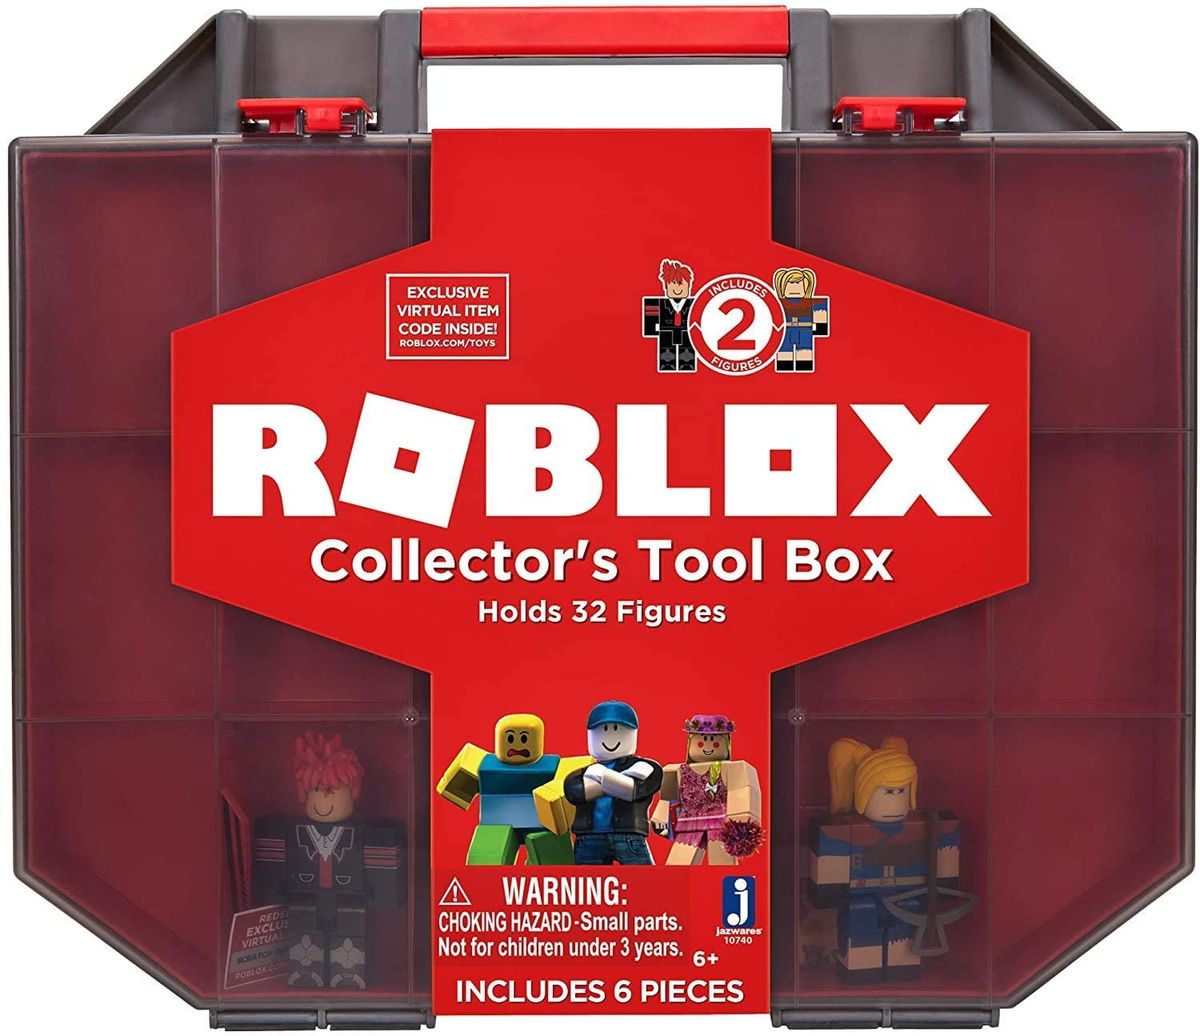 Best Prime Day Toy Deals 2020 The Best Lego And Stem Sets Marvel And Funko Figures And More Techradar - bb leg roblox